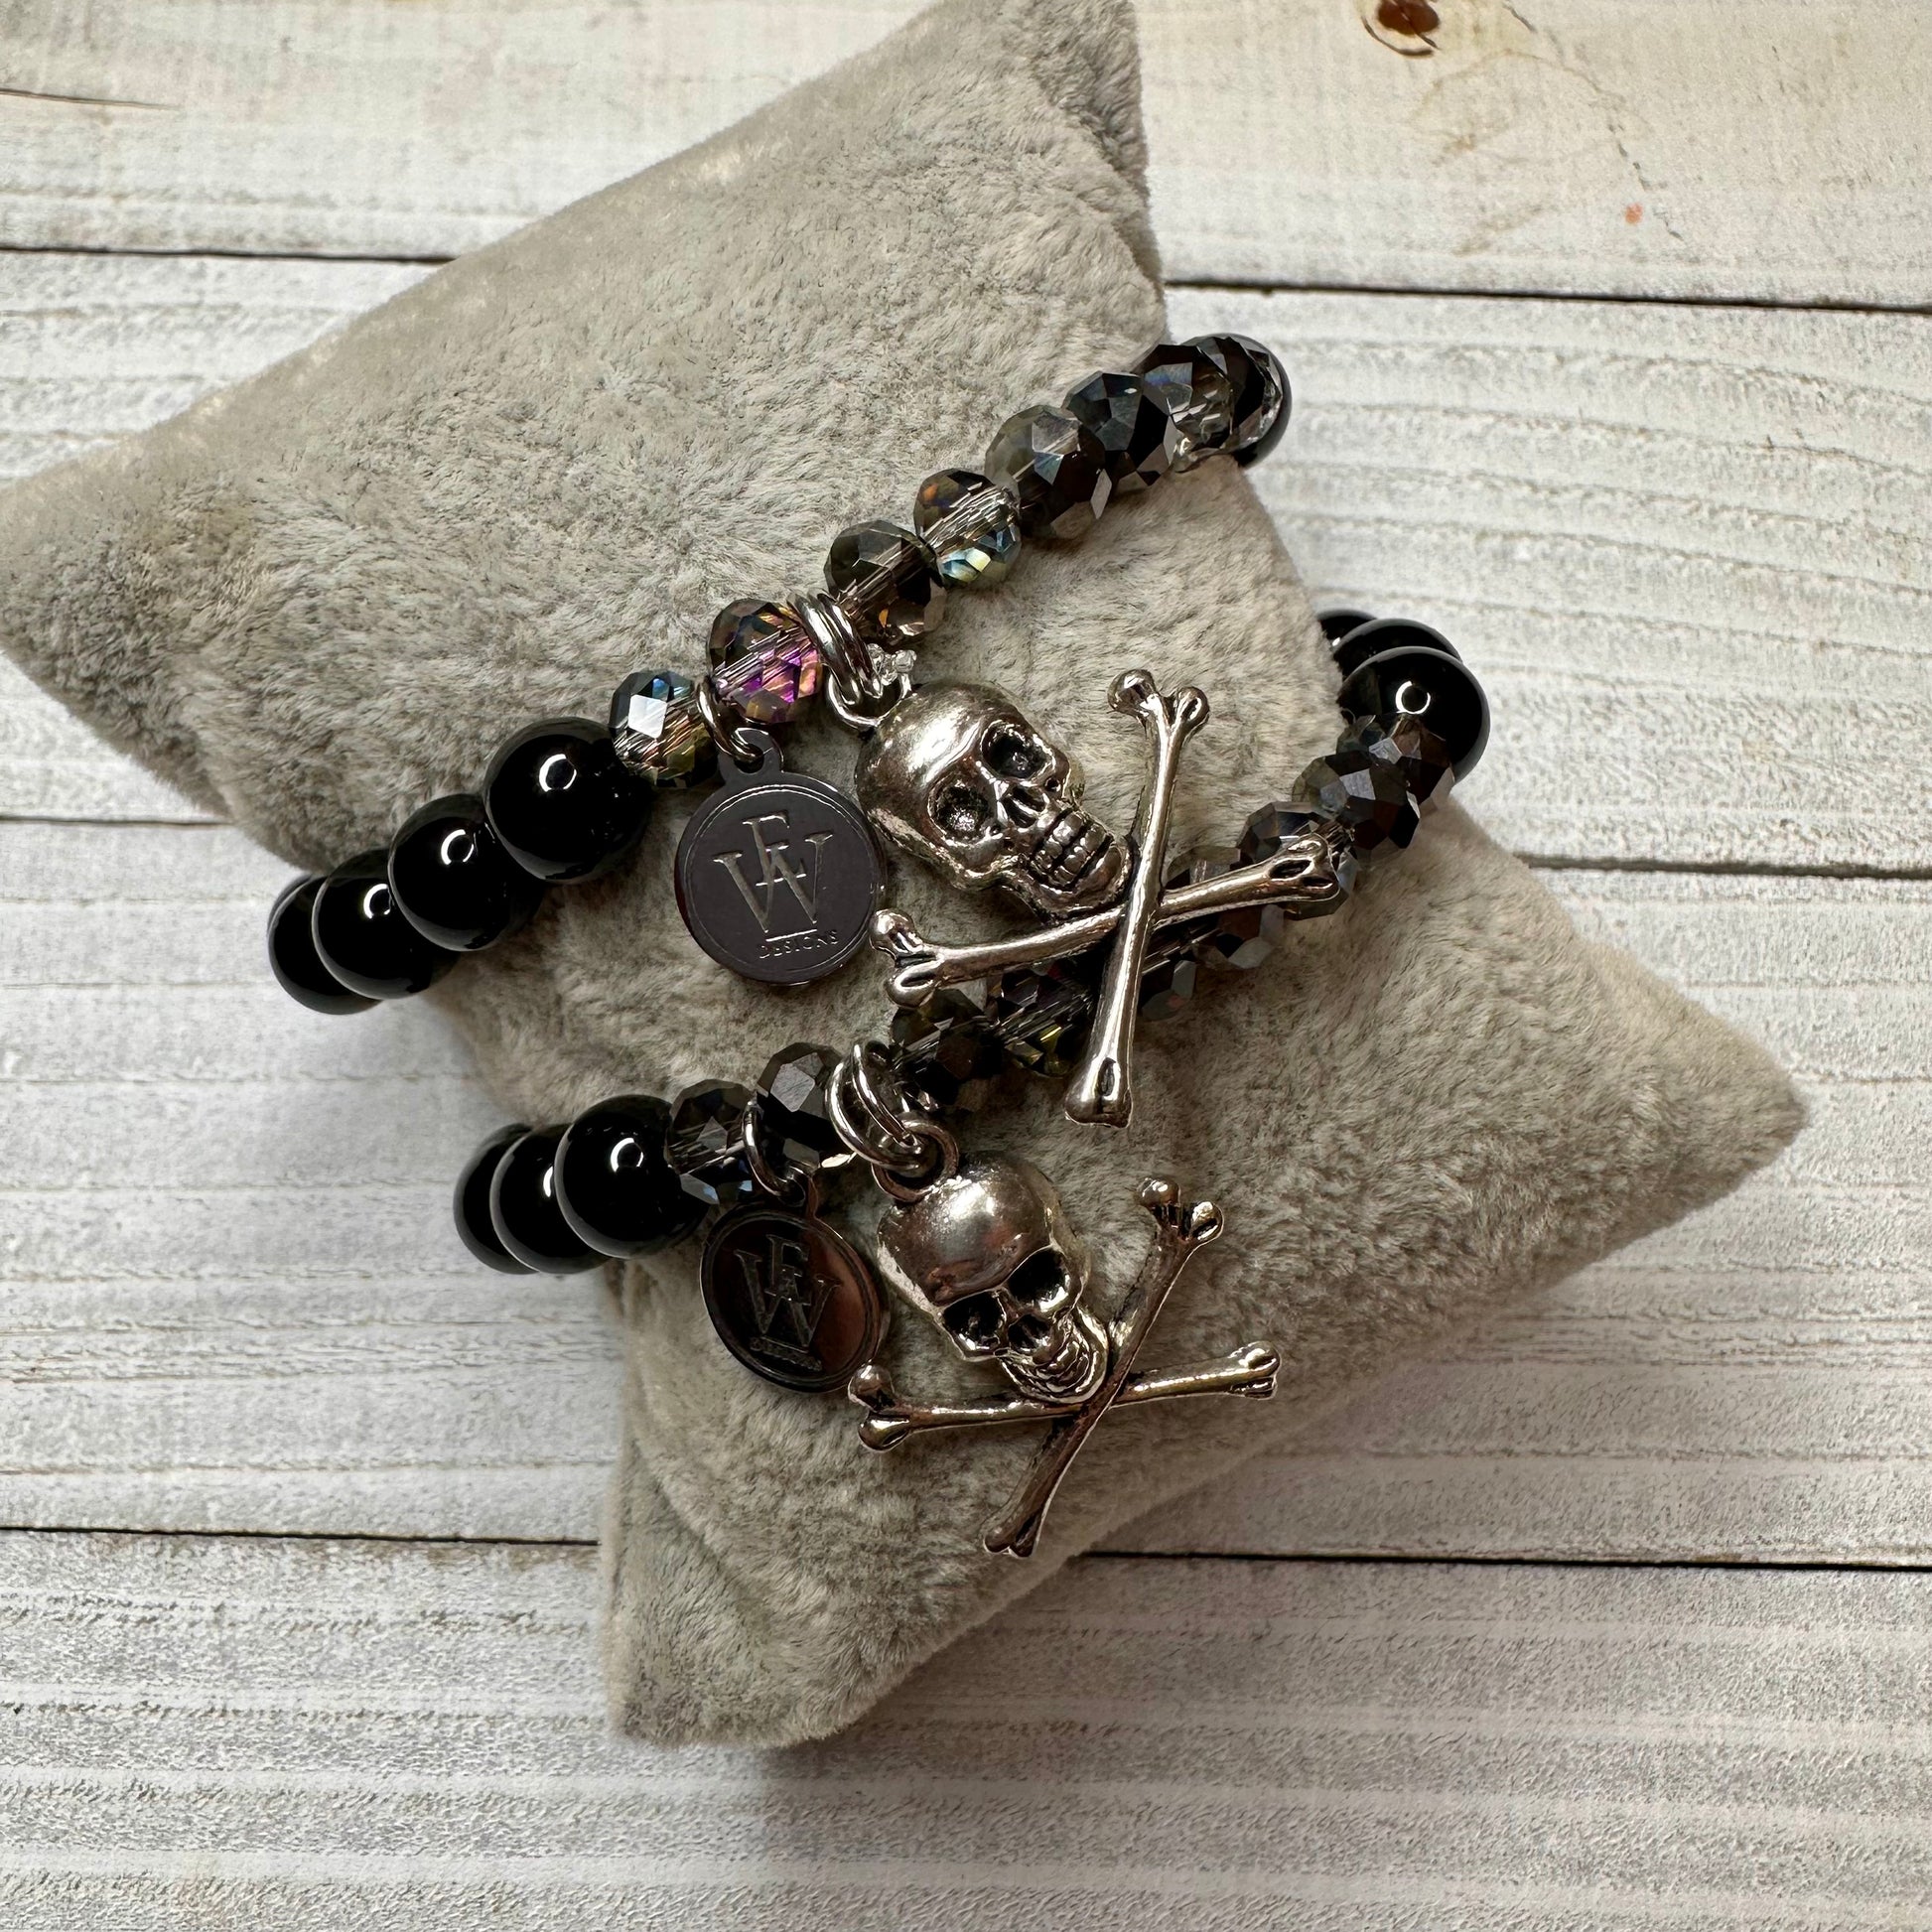 Agate Beads and Crystals Bracelet with a Metal Crossed Bone Skull Charm 